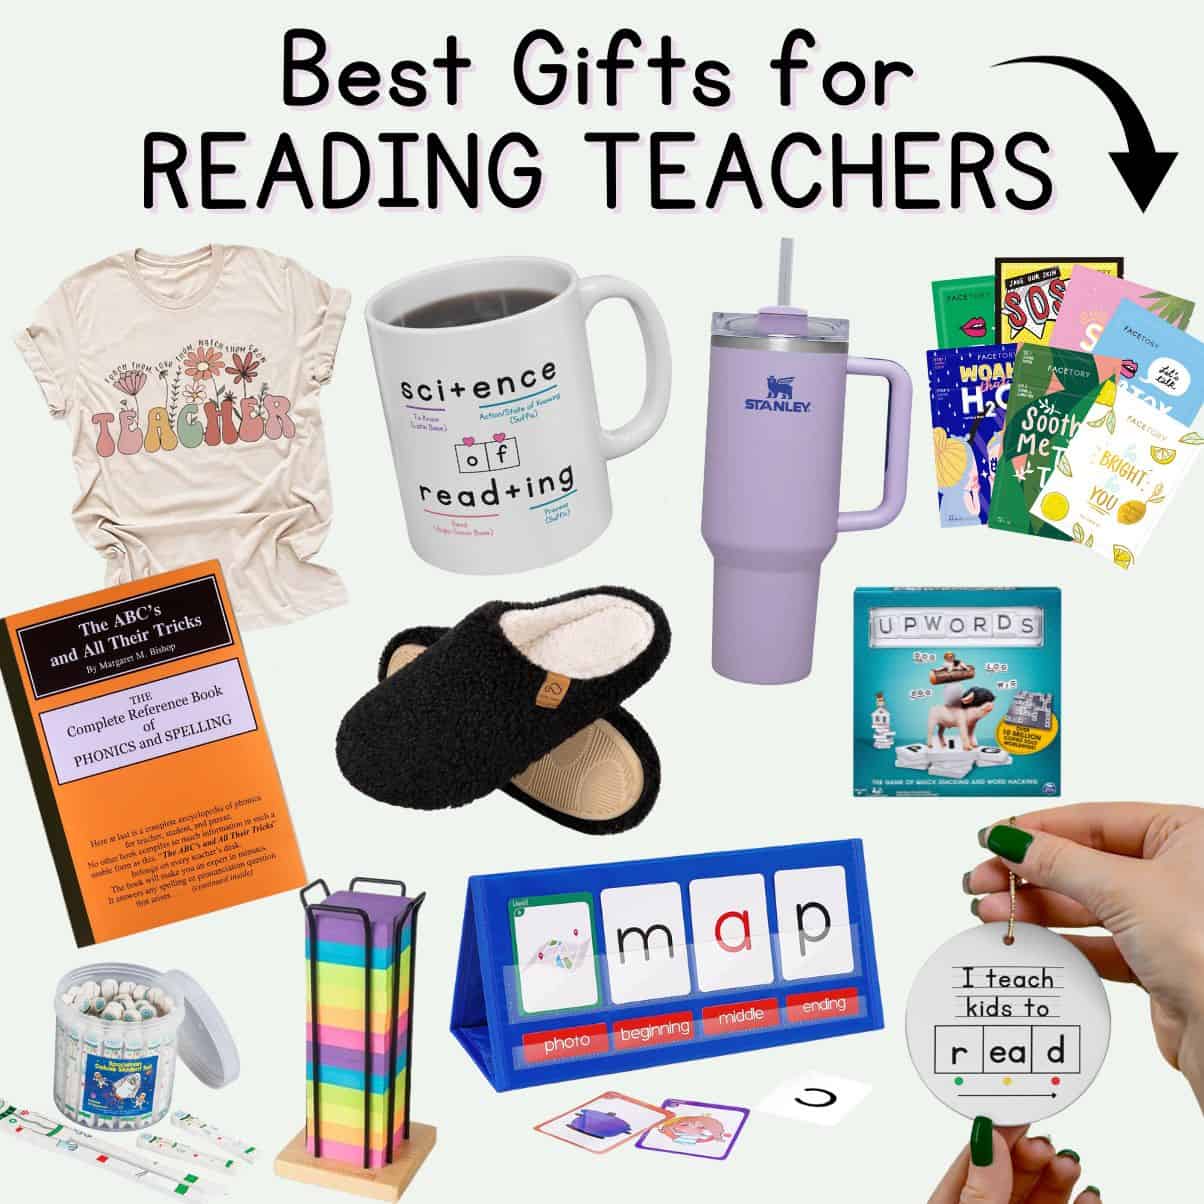 Graphic with a collage of images of gifts that reading teachers would enjoy.